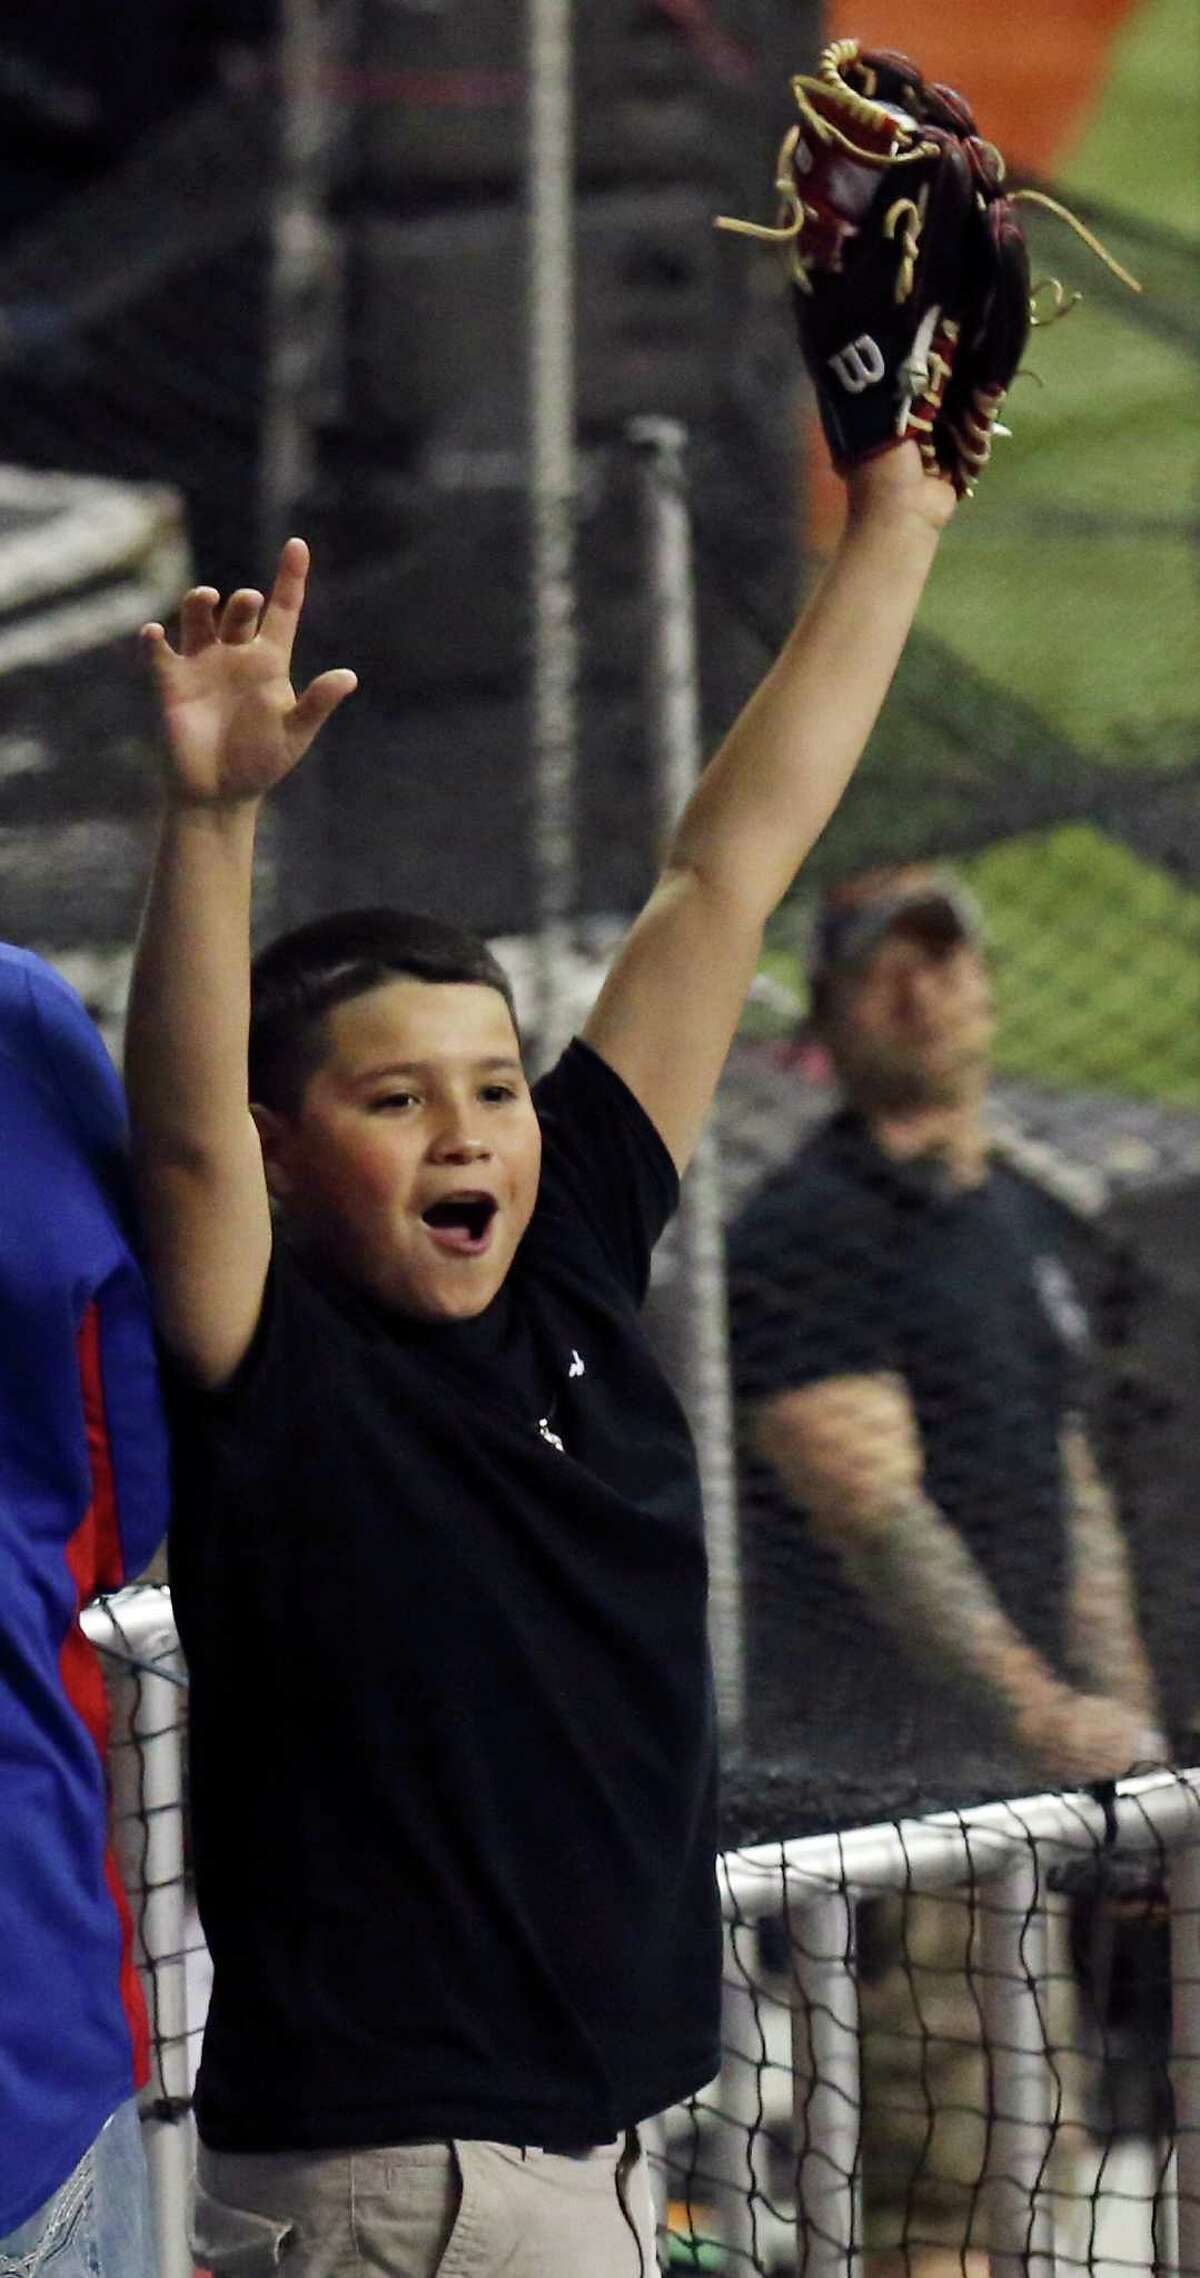 Texas Rangers fan Brandon Garcia, 14, celebrates after catching a ball hit into the stands during batting practice before the Rangers and Kansas City Royals Big League Weekend spring exhibition baseball game Friday March 18, 2016 at the Alamodome.